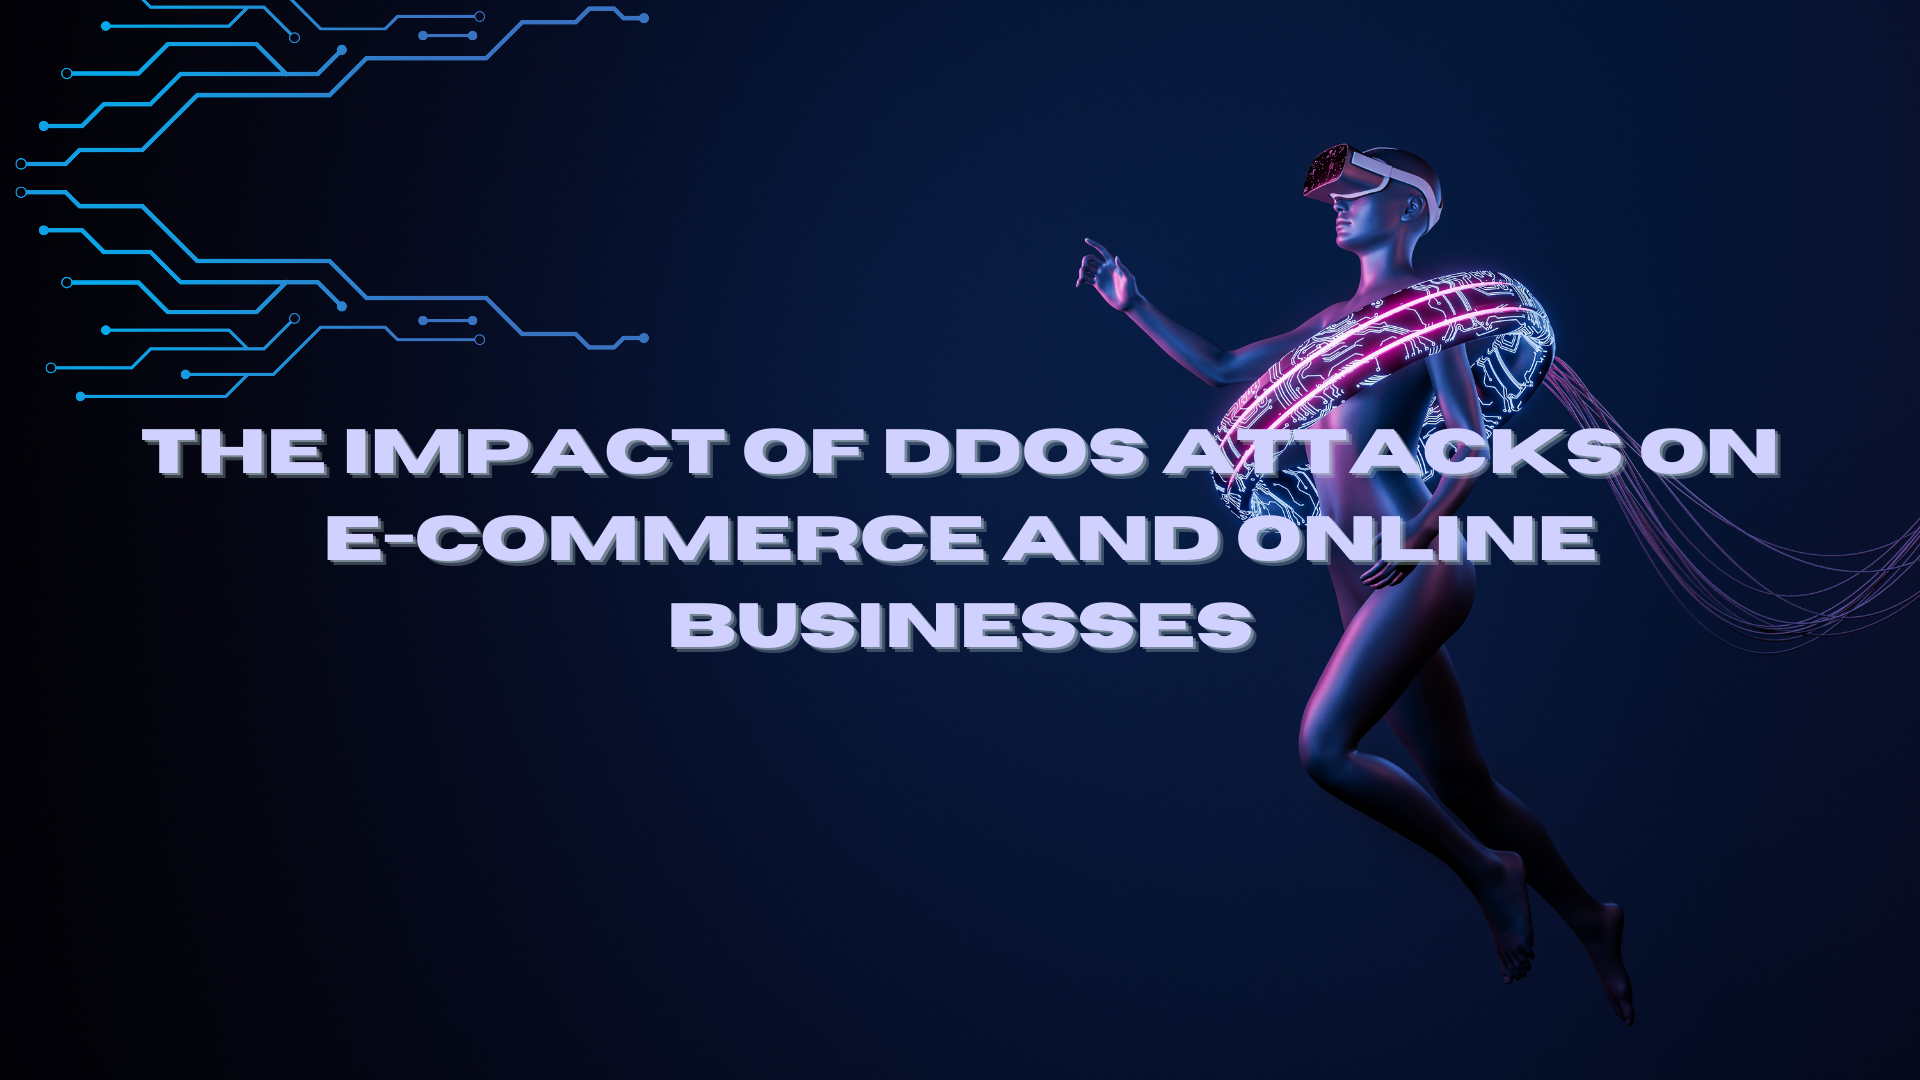 The impact of DDoS attacks on e-commerce and online businesses